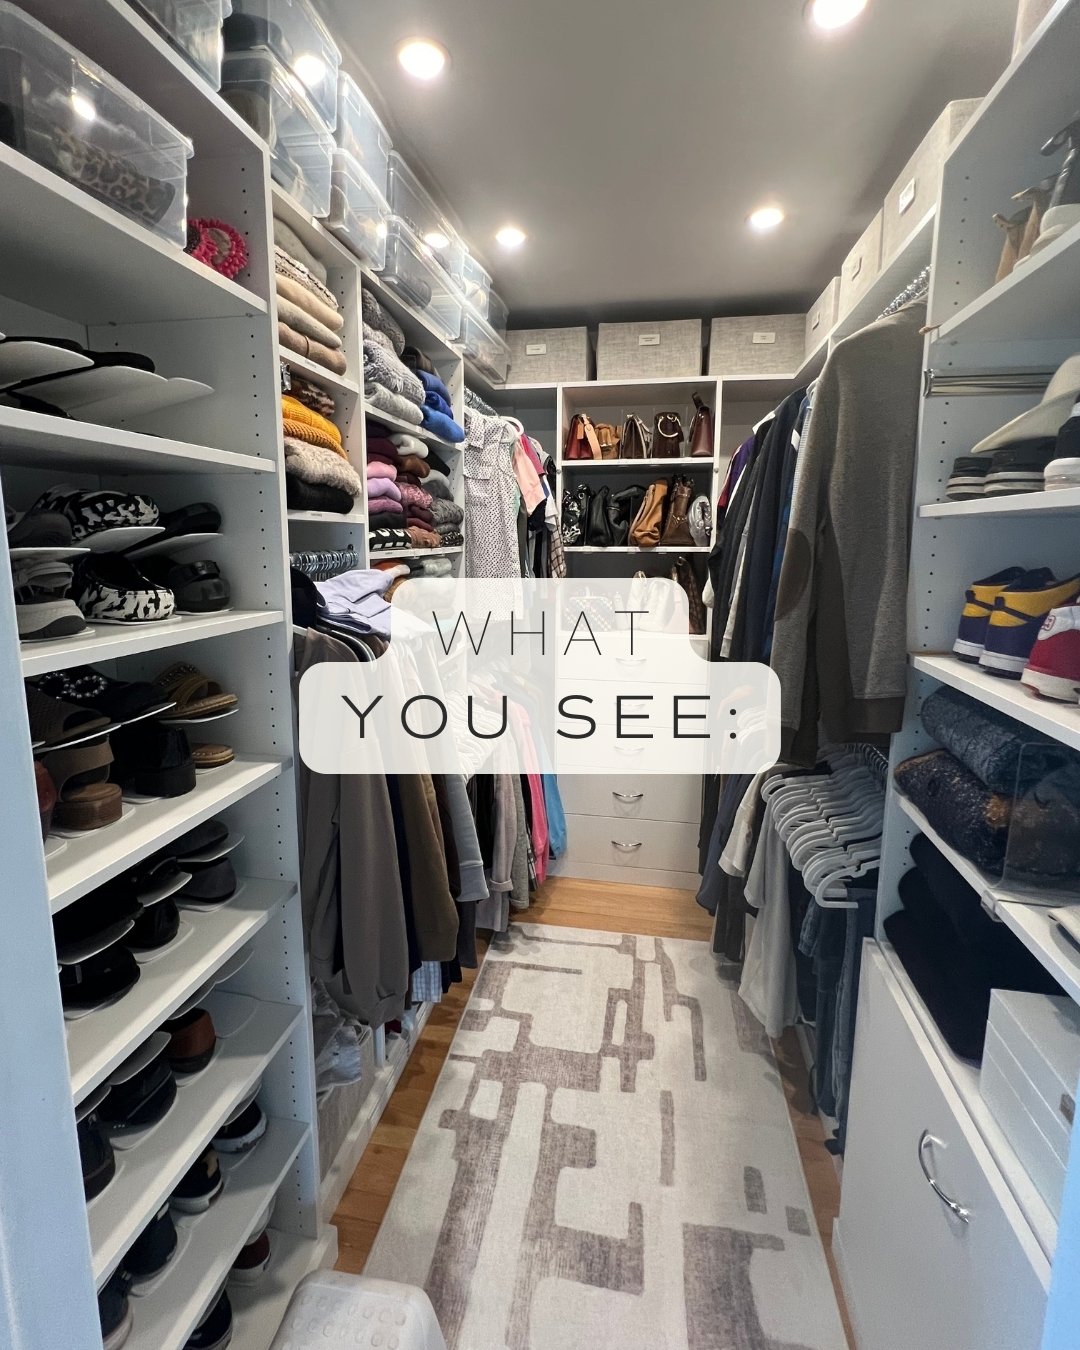 It&rsquo;s hard to see what goes into a home organization project by just looking at &ldquo;after&rdquo; photos.

So let&rsquo;s dissect this master closet project that we recently finished for a client&rsquo;s home. ⬇️

We started with a major purge